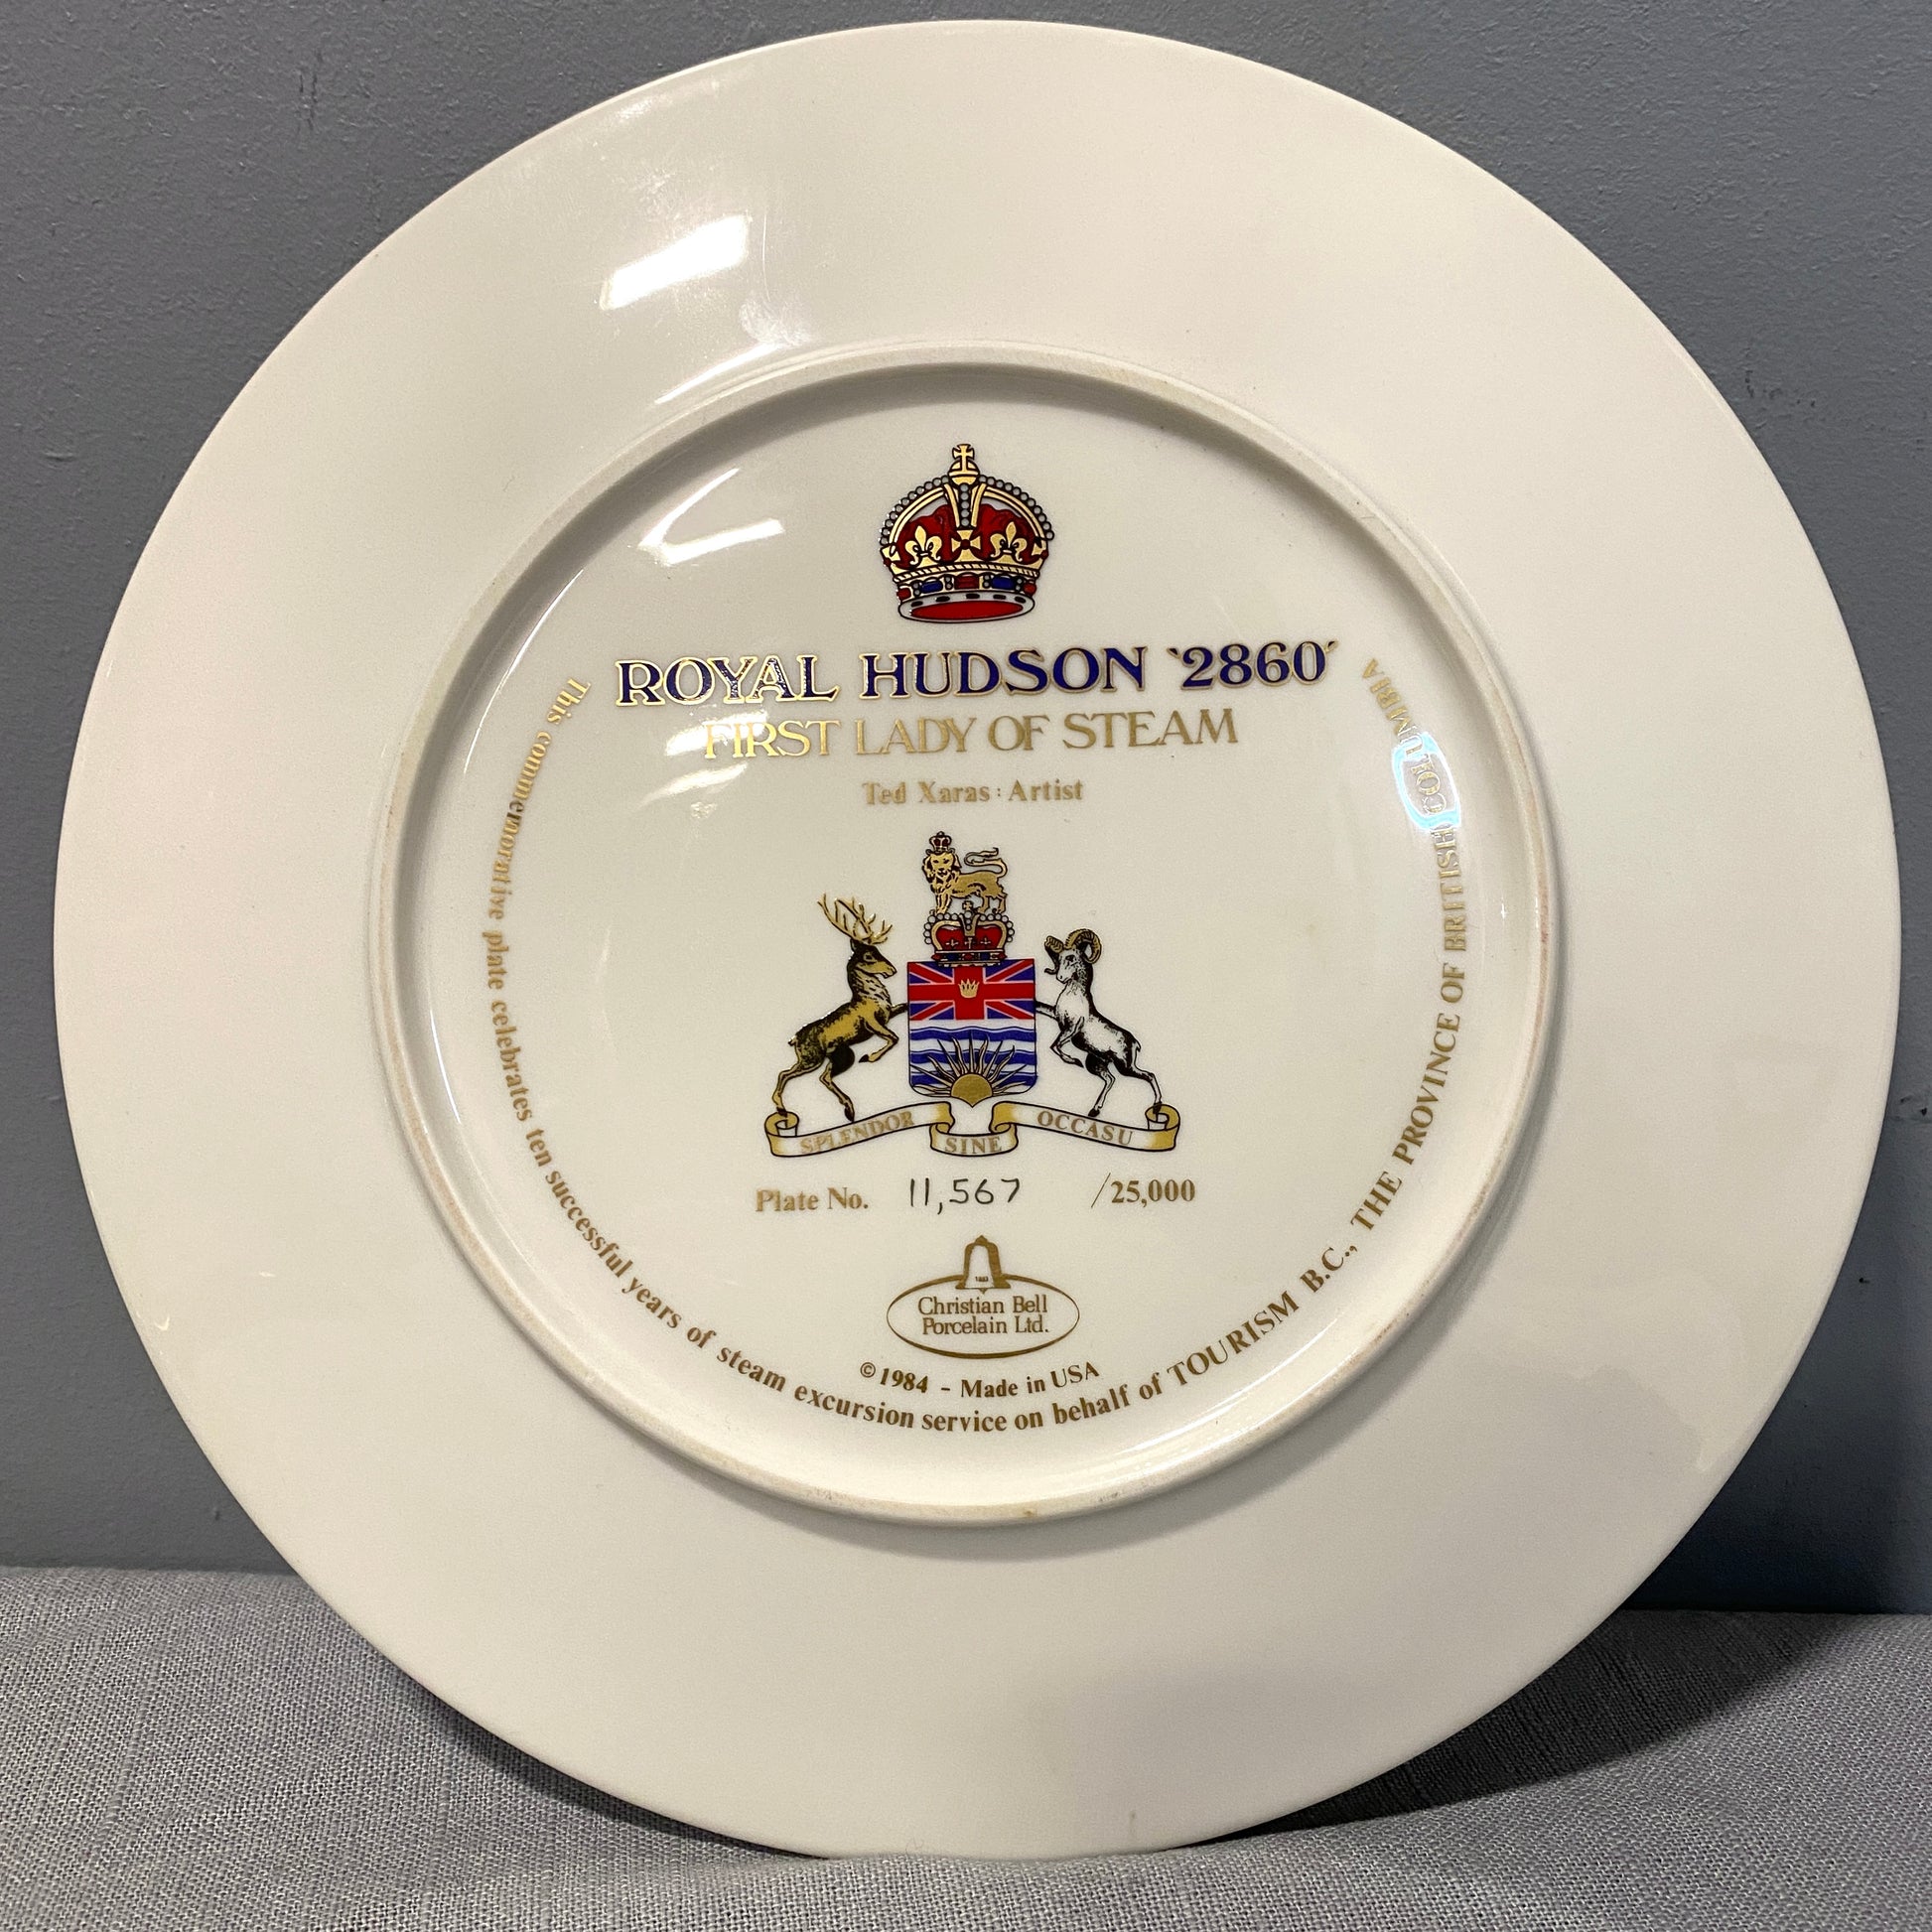 'First Lady of Steam' collector plate for sale in Calgary, Alberta.